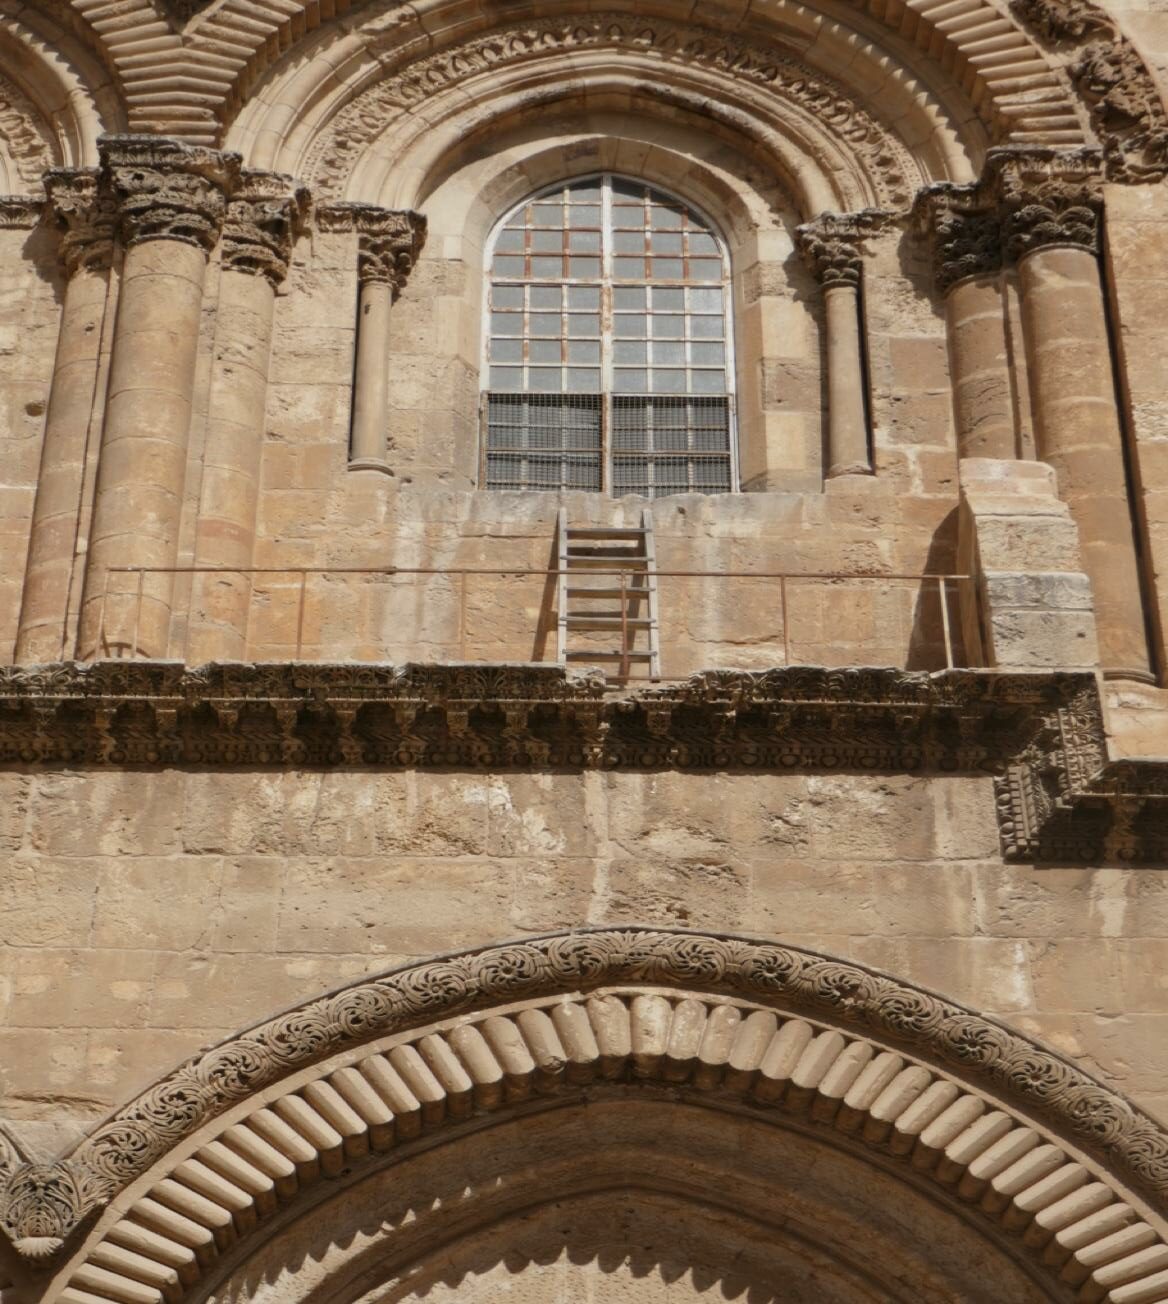 The ladder outside the Church of the Holy Sepulchre